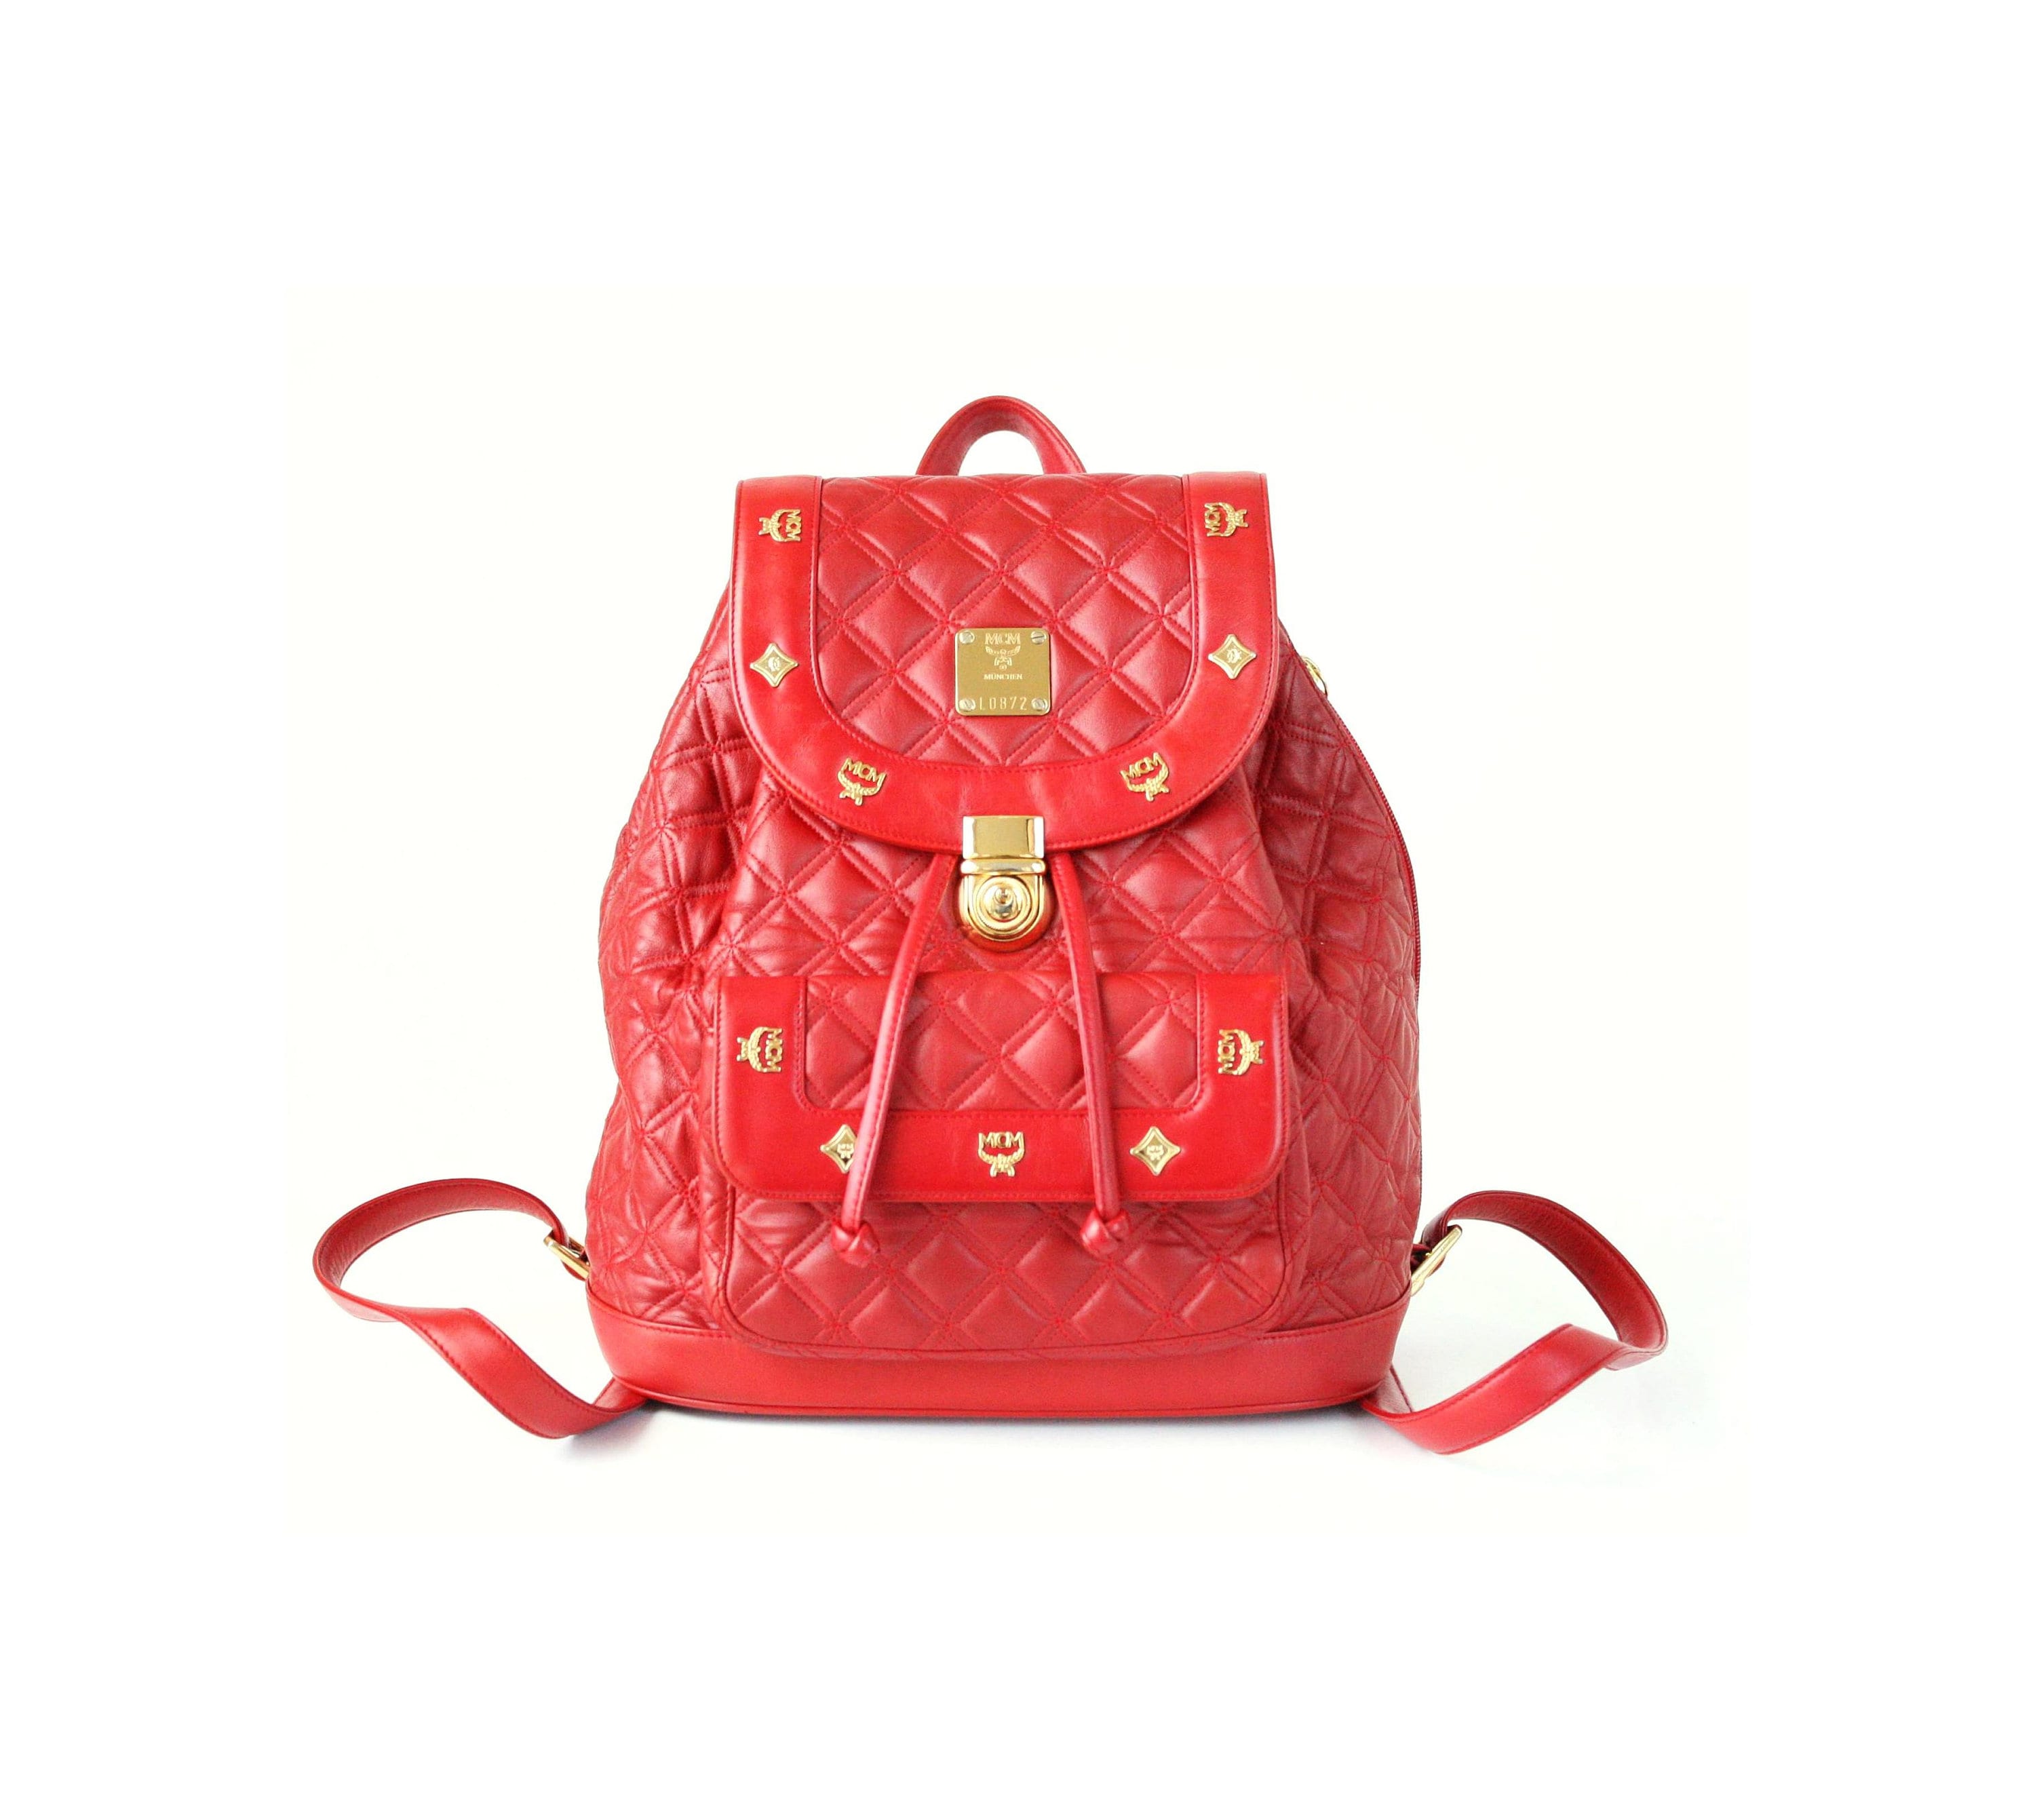 real red mcm backpack